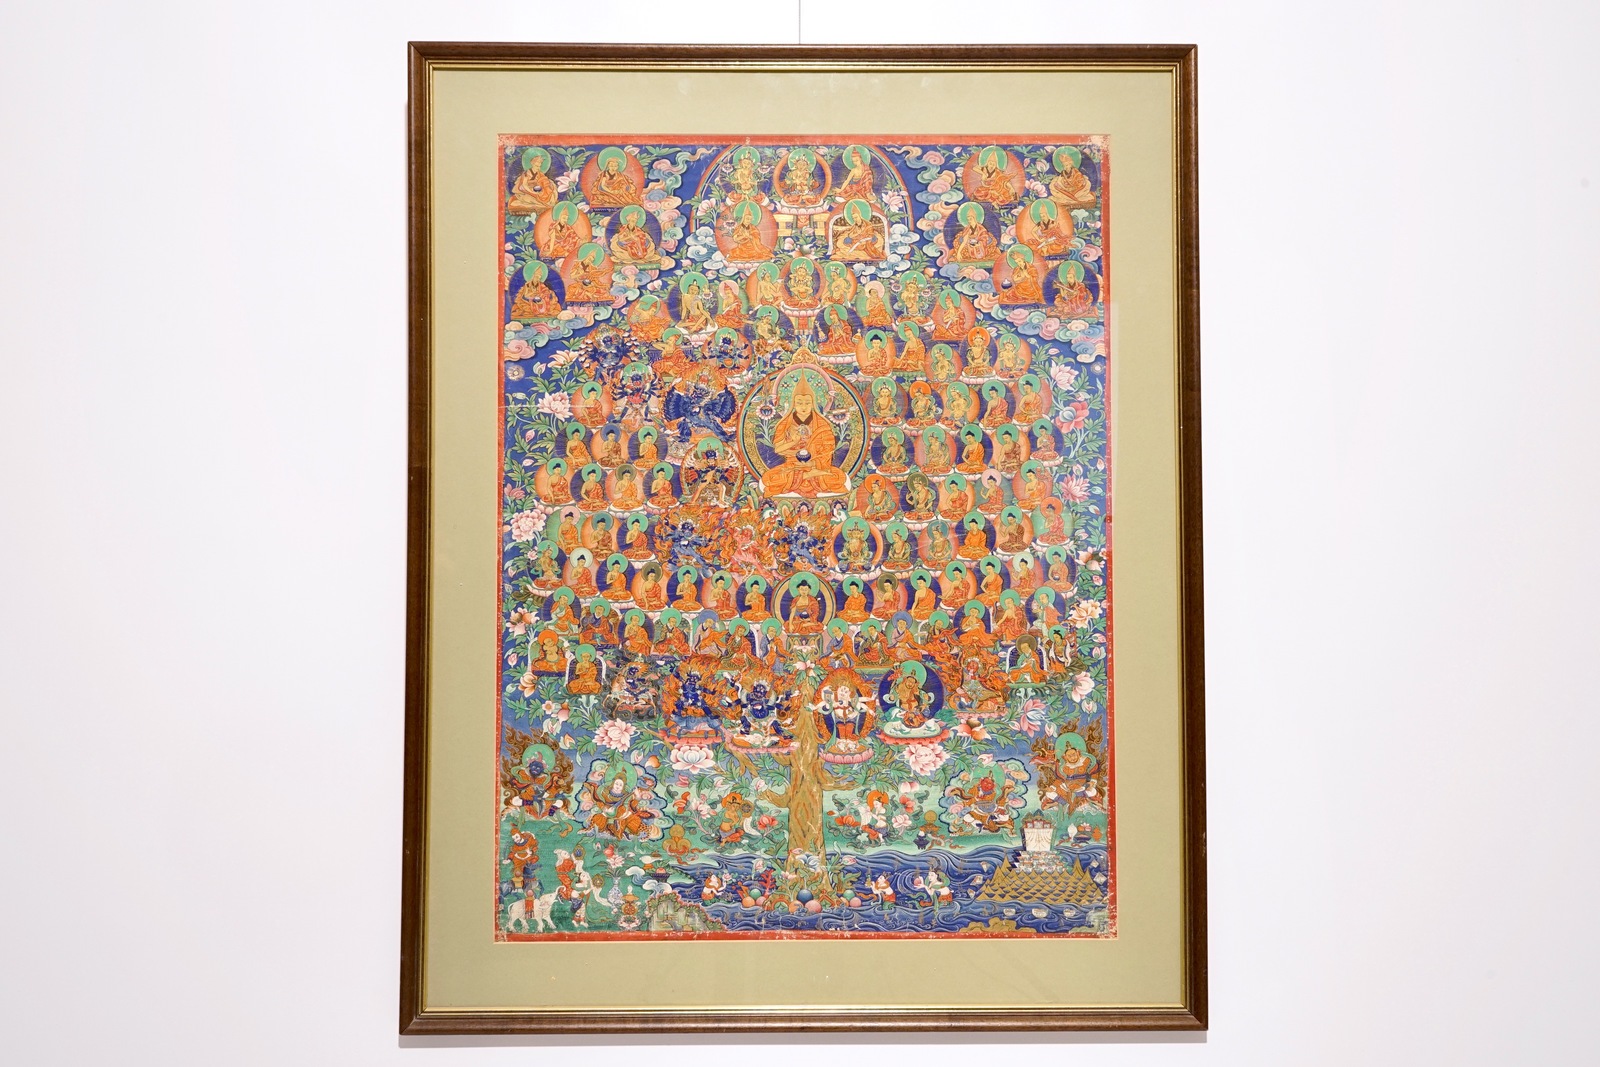 A Refuge Tree thangka, Tibet or Nepal, 19/20th C. Dim.: 76 x 58 cm (excl. the frame) Condition - Image 2 of 2